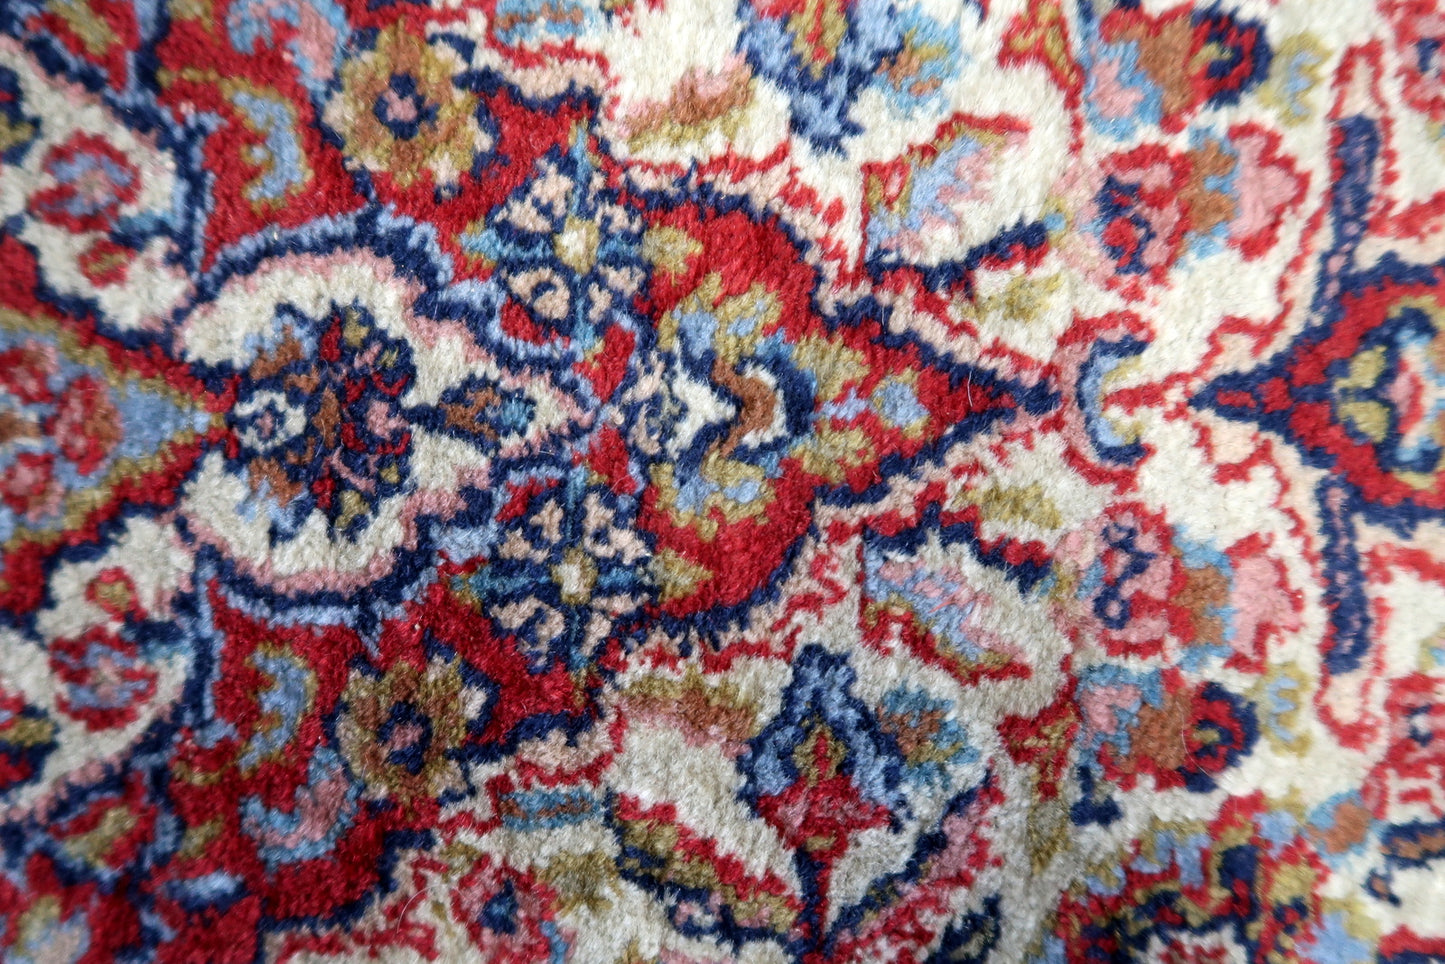 Close-up of the rug's corner, showcasing the intricate craftsmanship